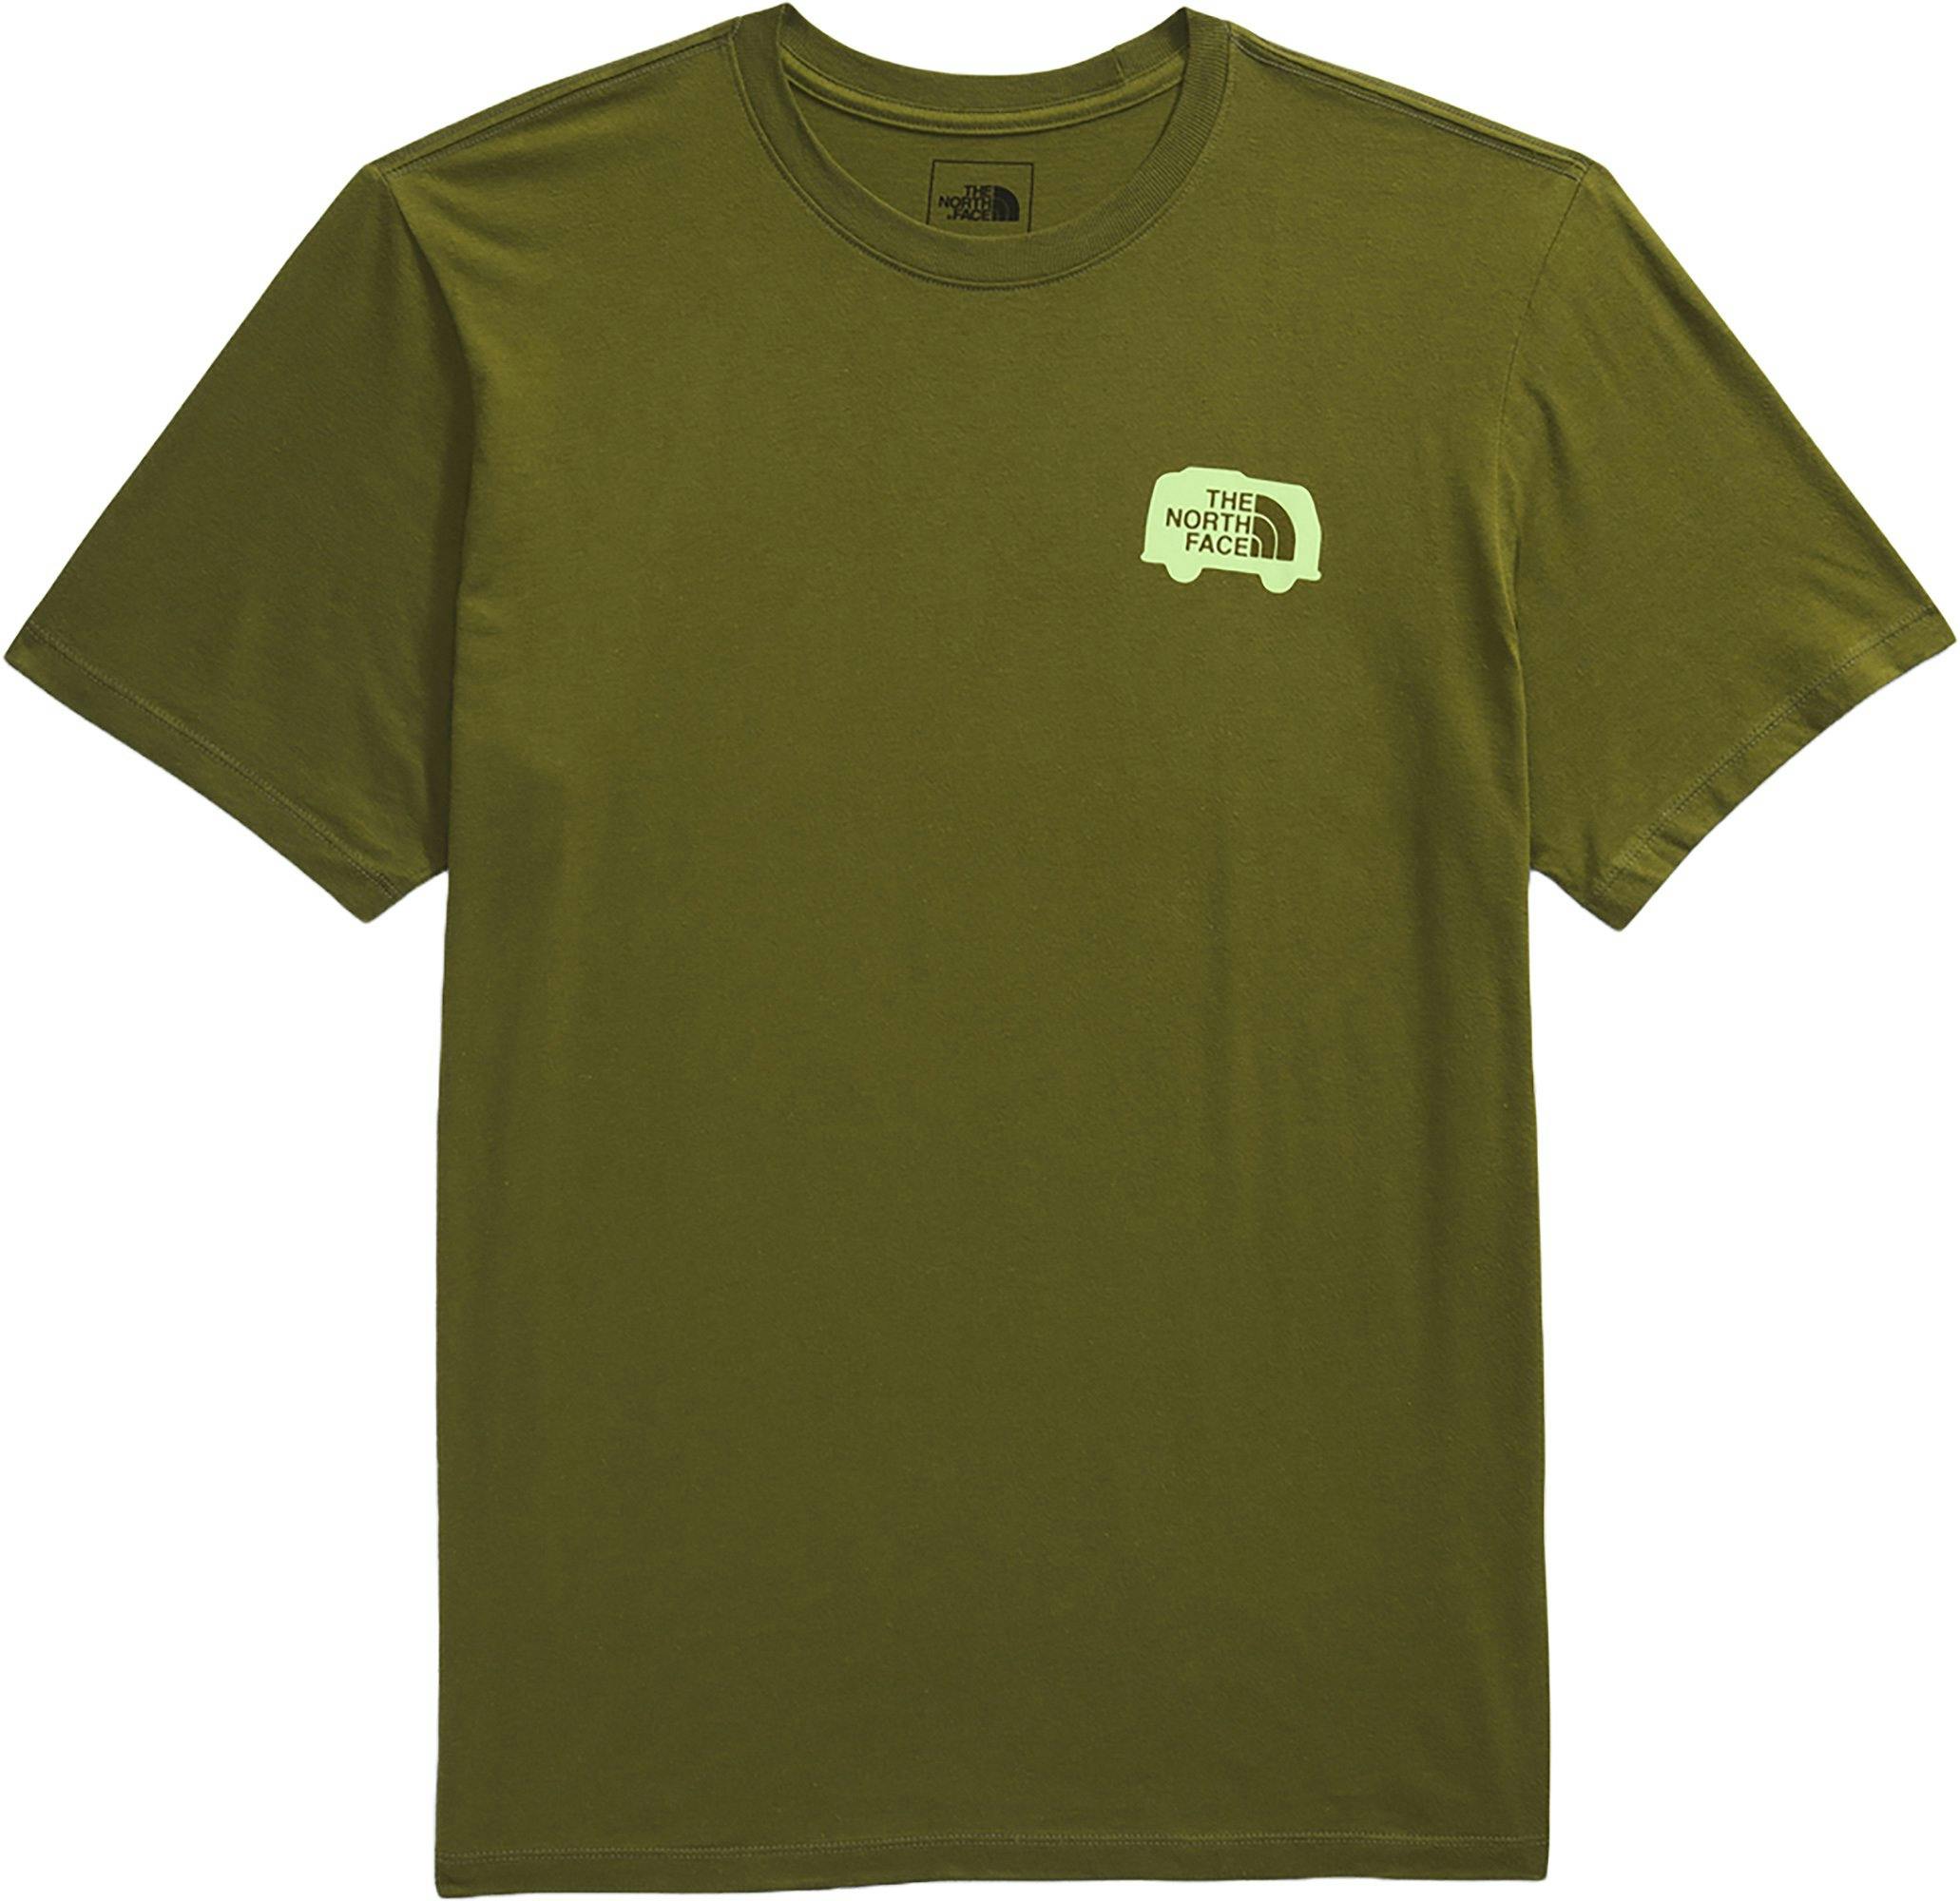 Product image for Short Sleeve Brand Proud T-shirt - Men's